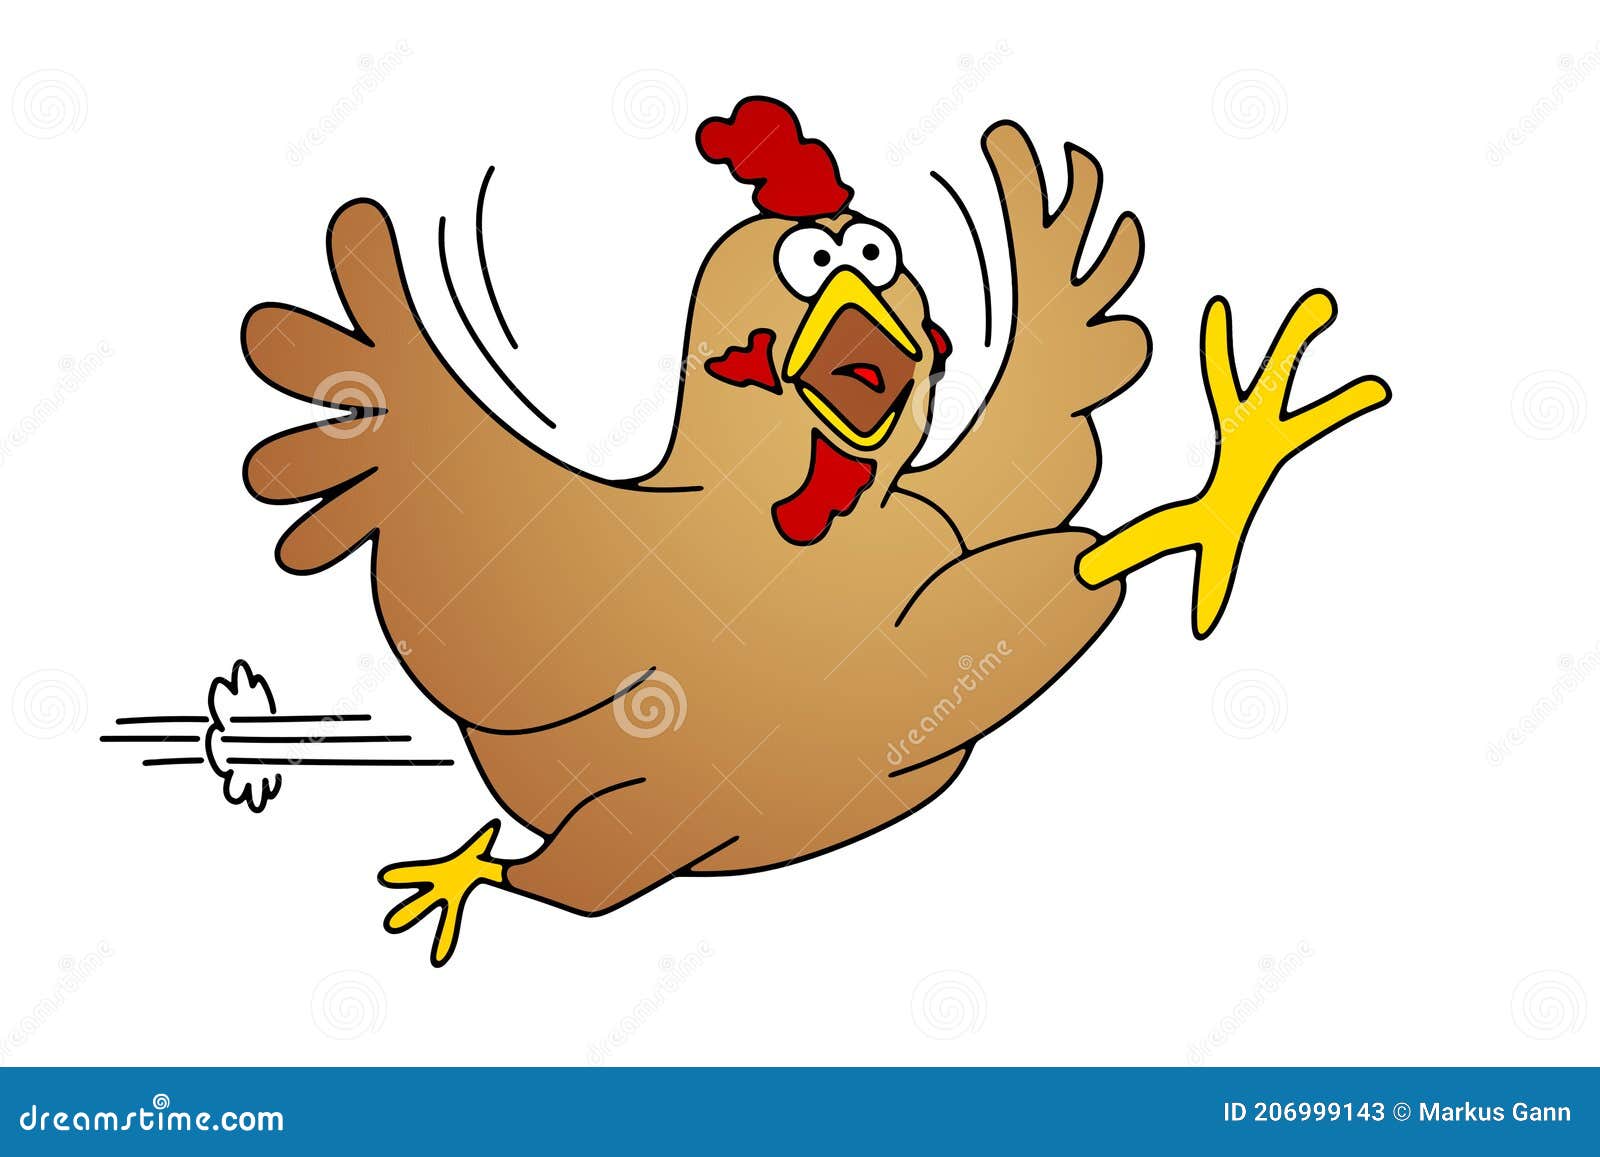 Running Chicken Comic Art Graphic Isolated on White Background Stock ...